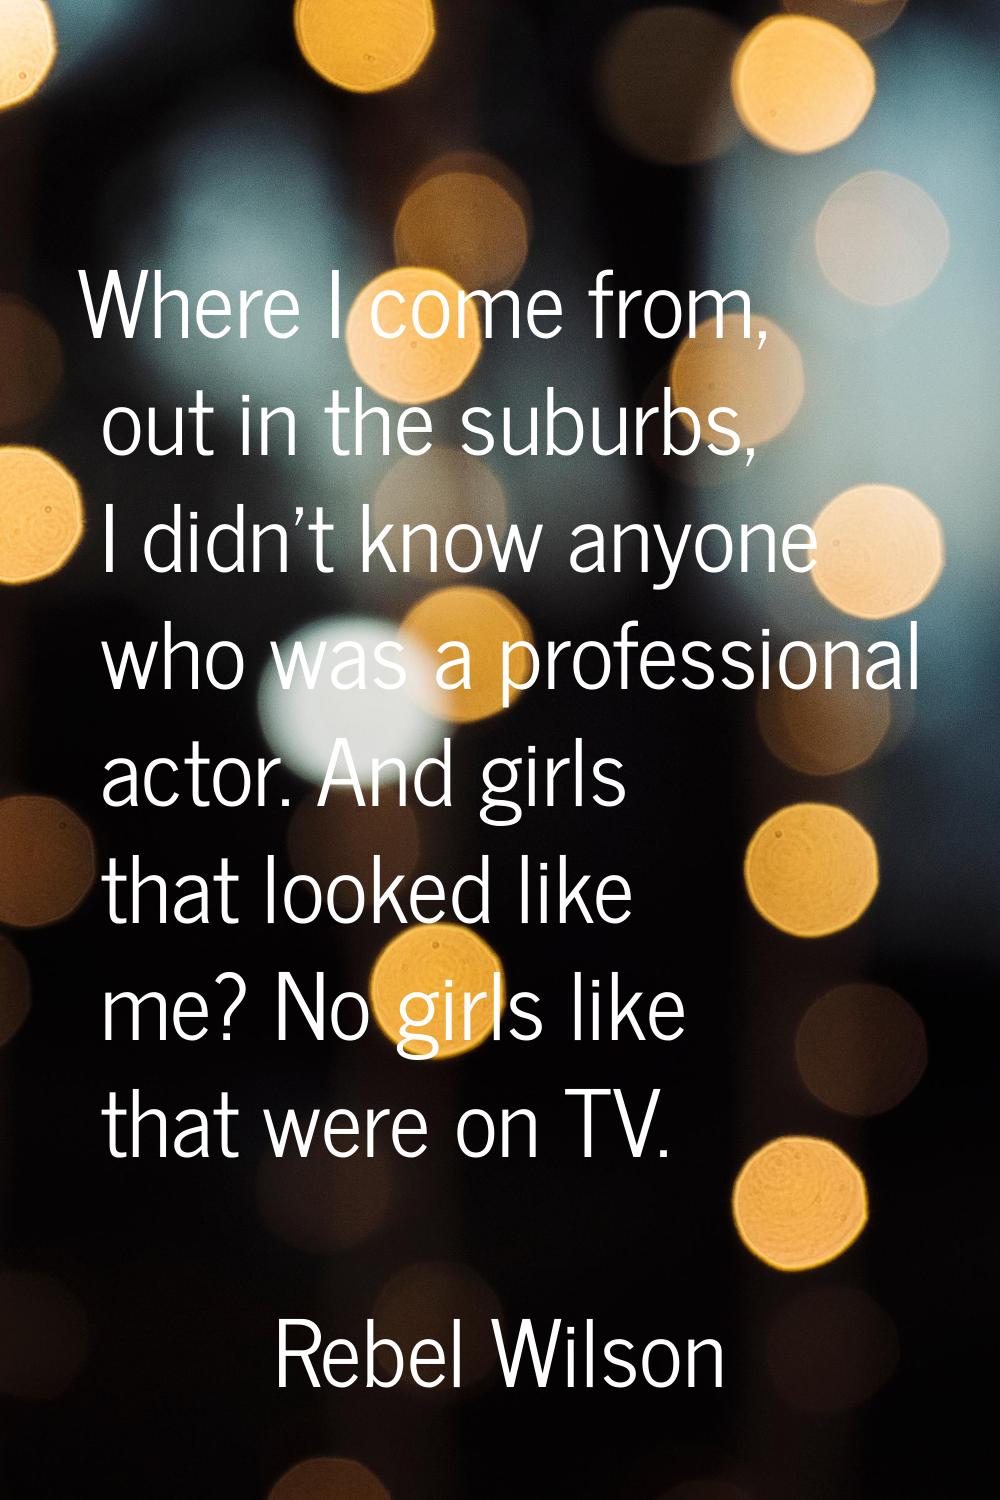 Where I come from, out in the suburbs, I didn't know anyone who was a professional actor. And girls